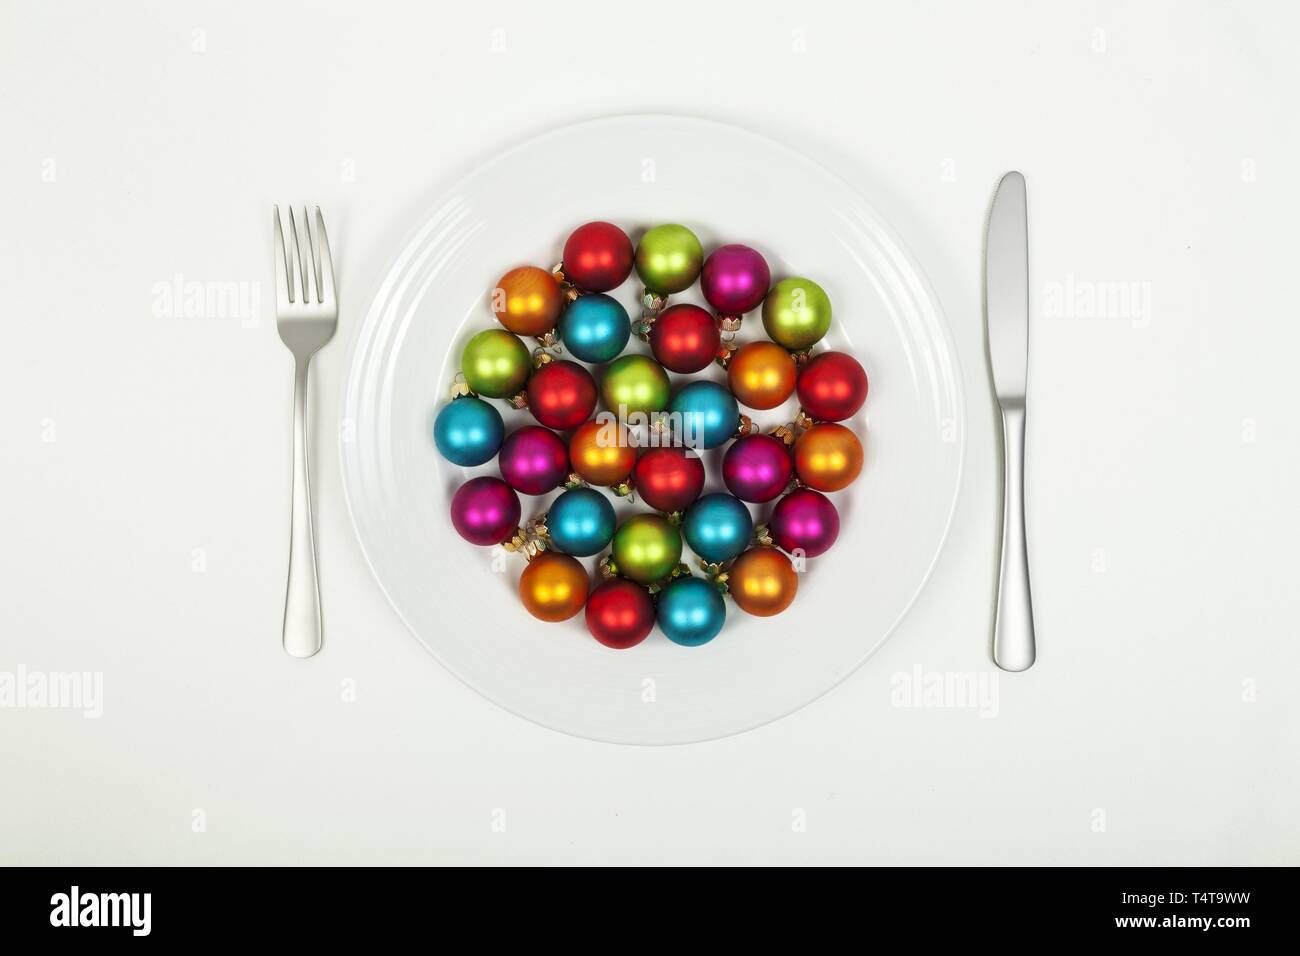 White plate, cutlery, baubles Stock Photo